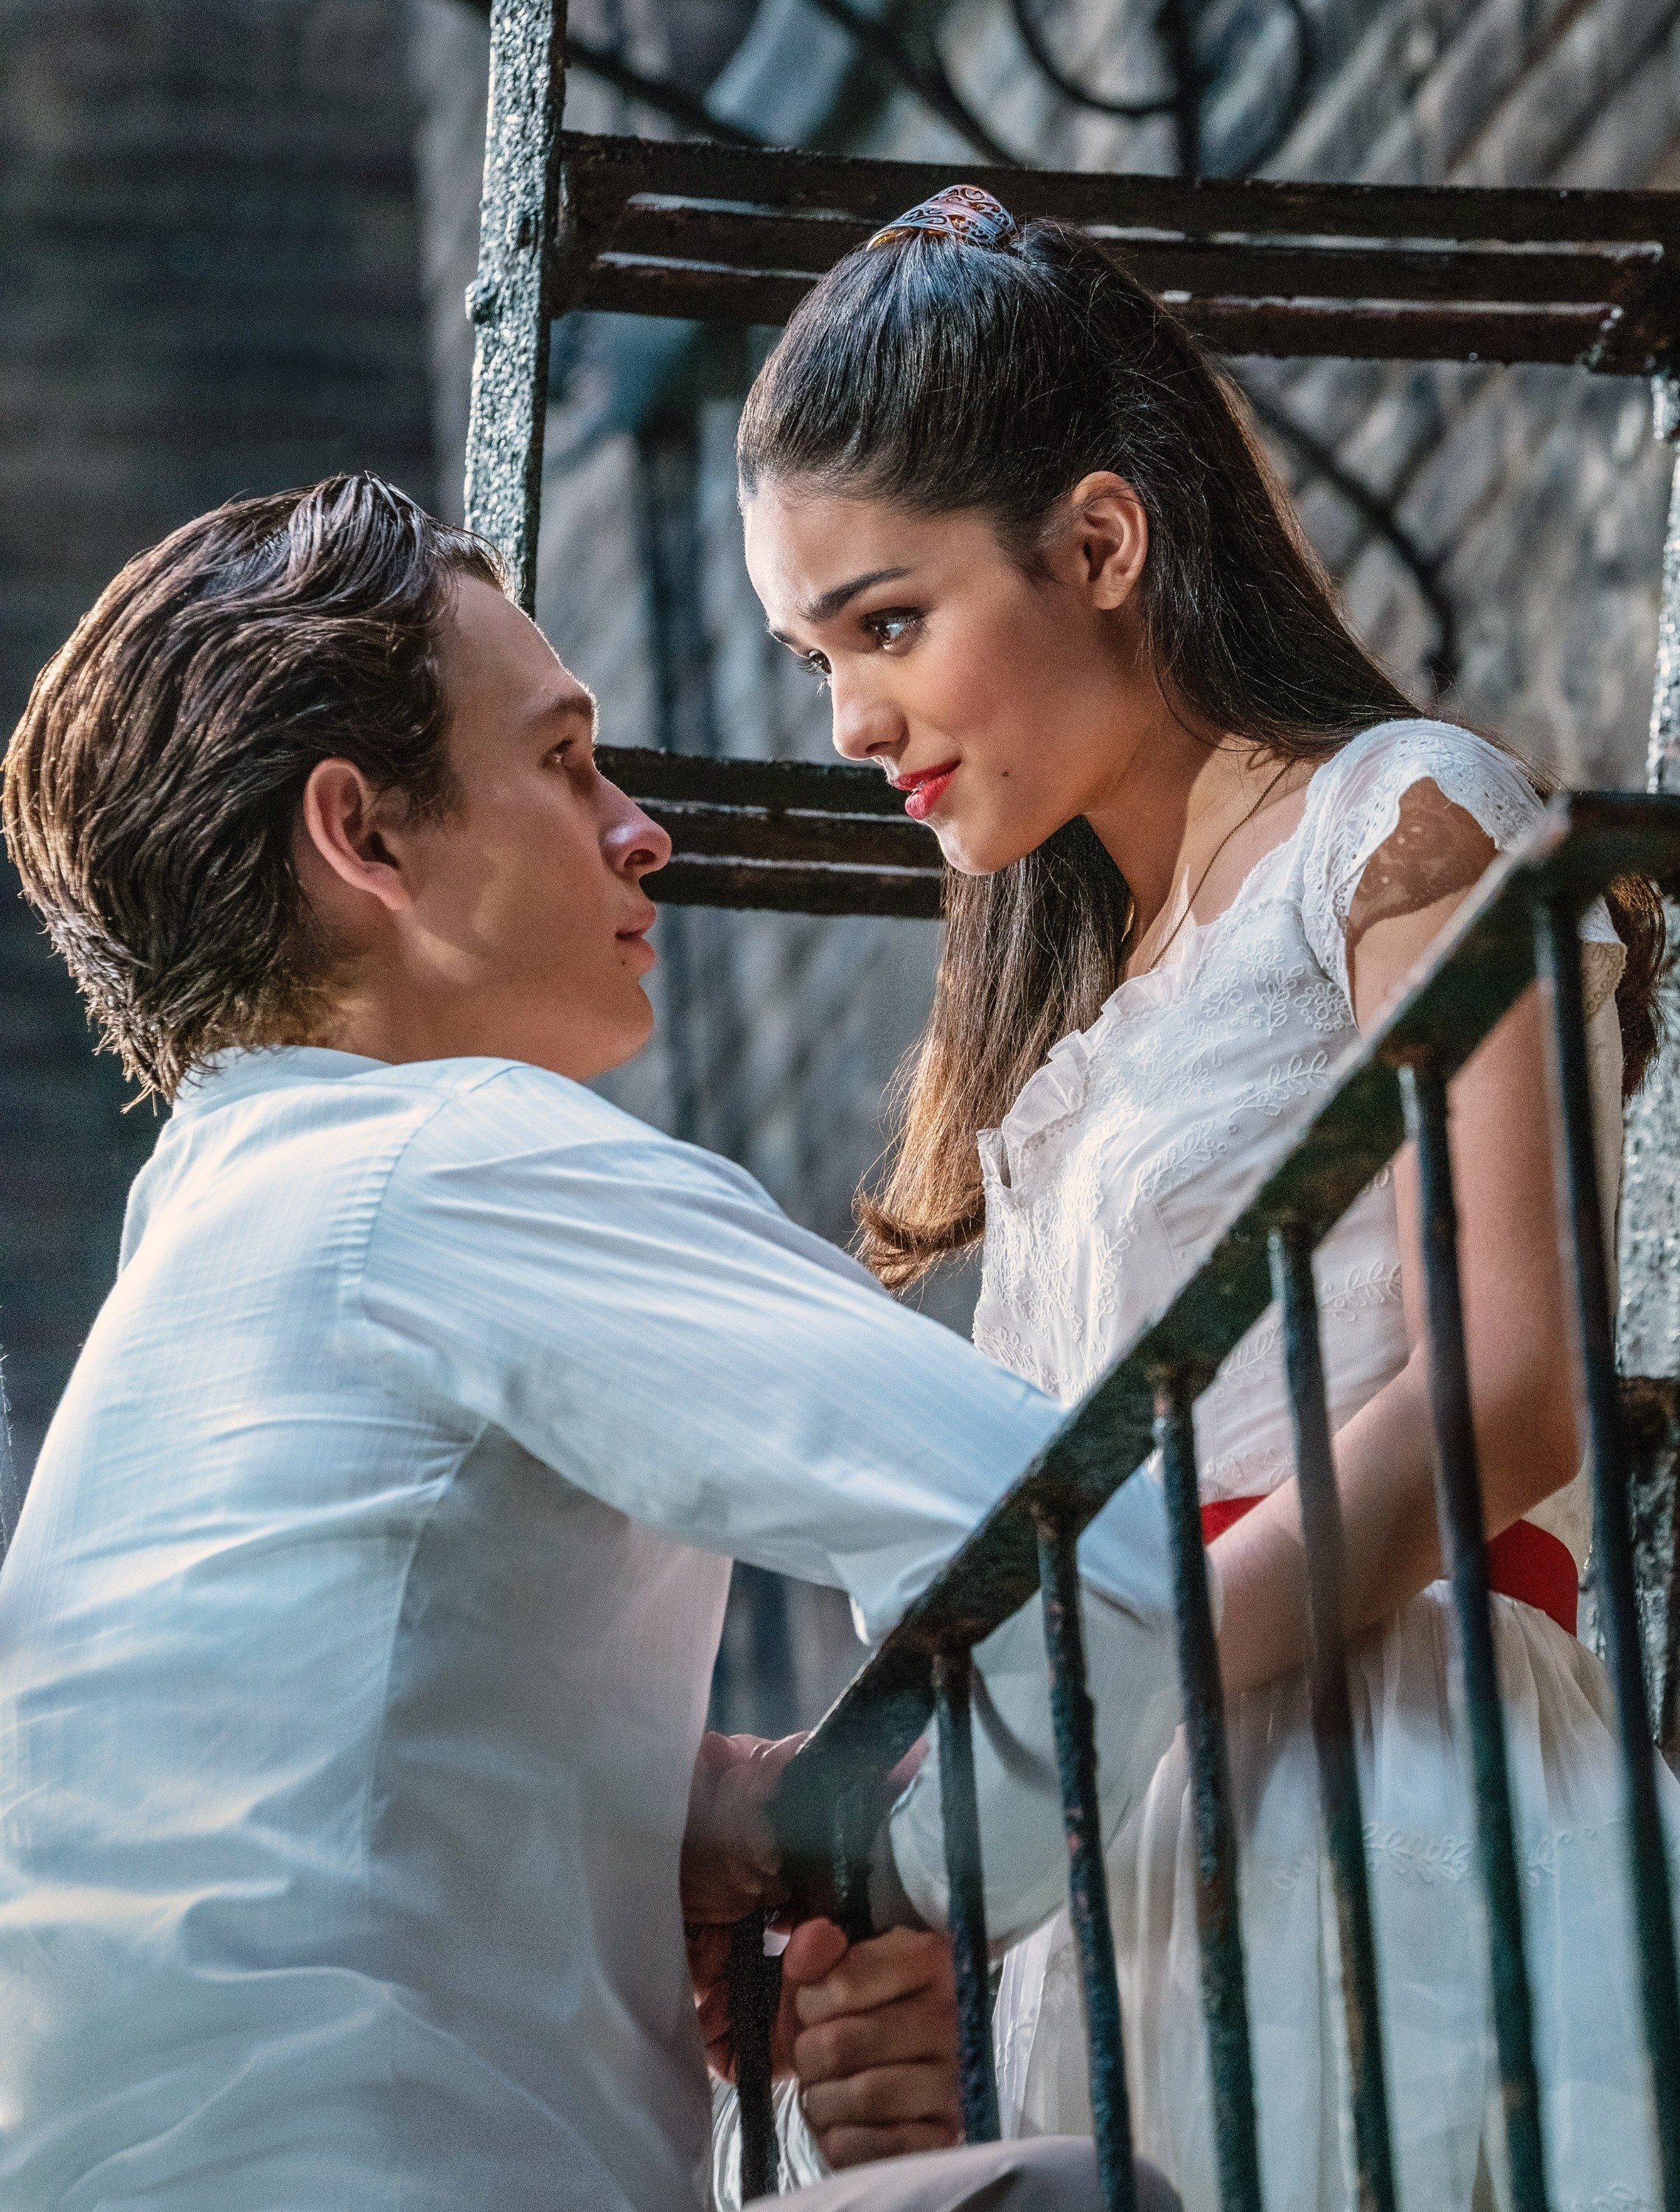 Ansel looking up at Rachel Zegler as they stand on opposite sides of a fire escape in a scene from the film